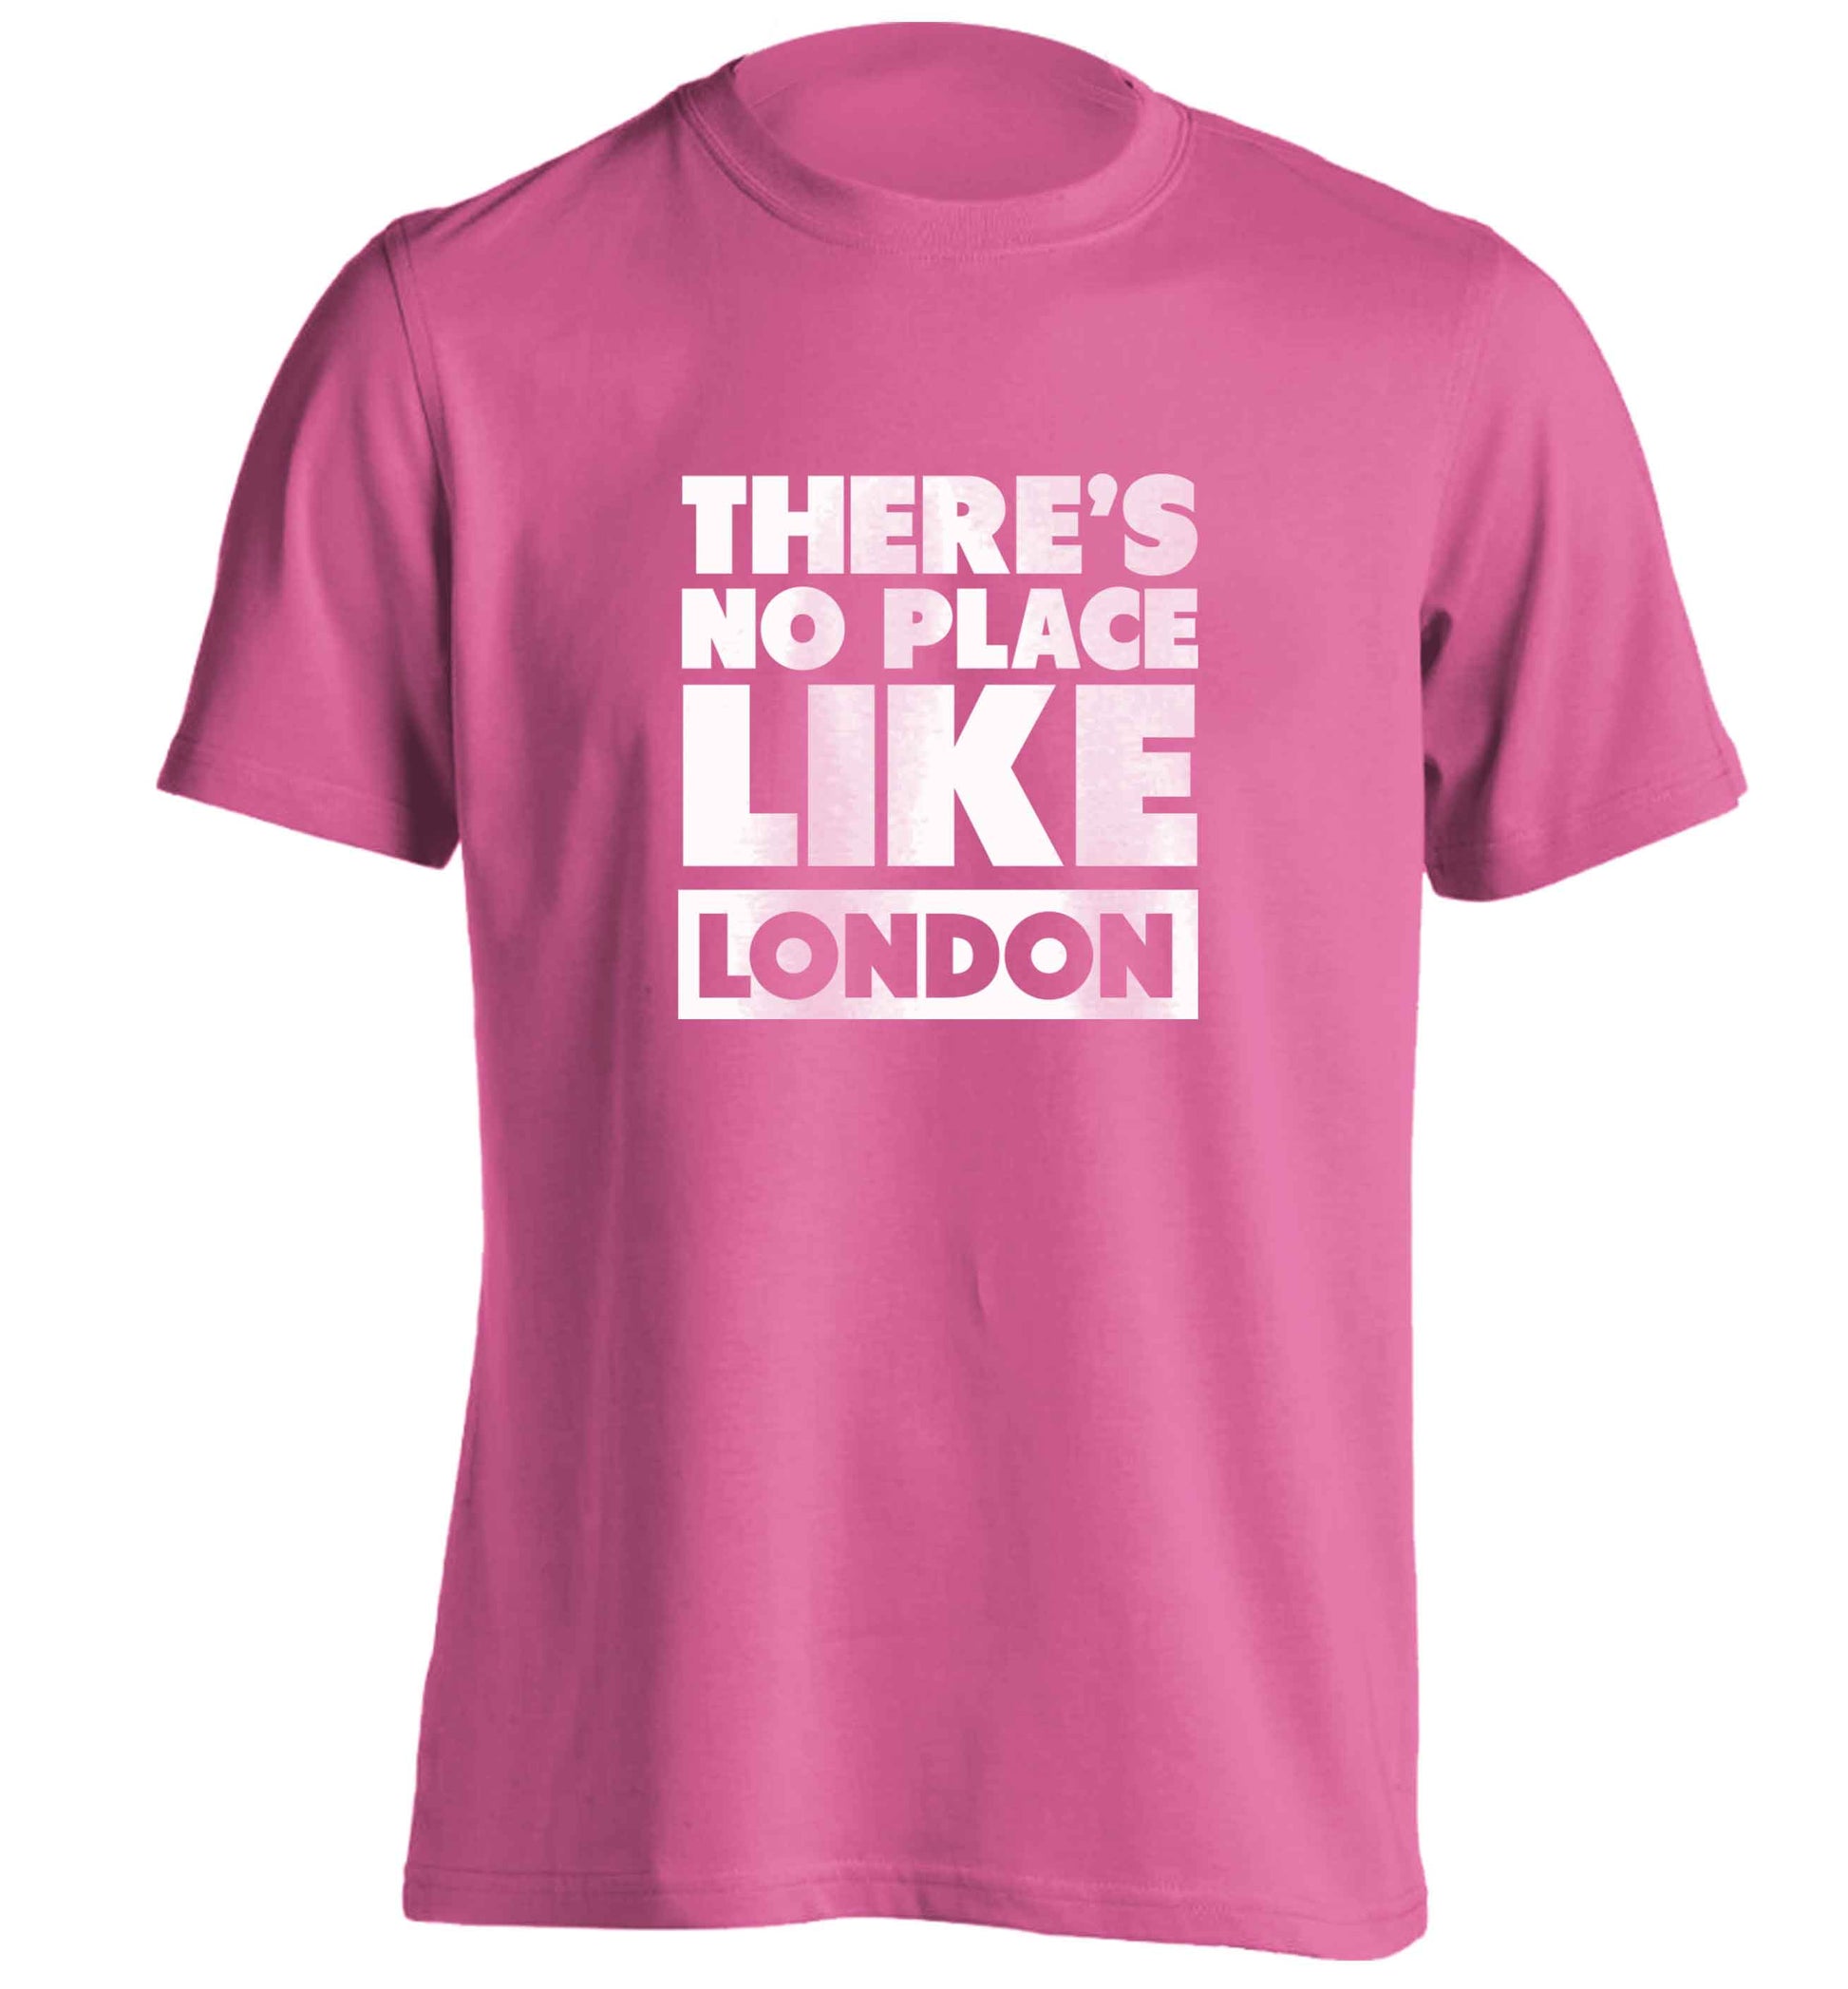 There's no place like England adults unisex pink Tshirt 2XL